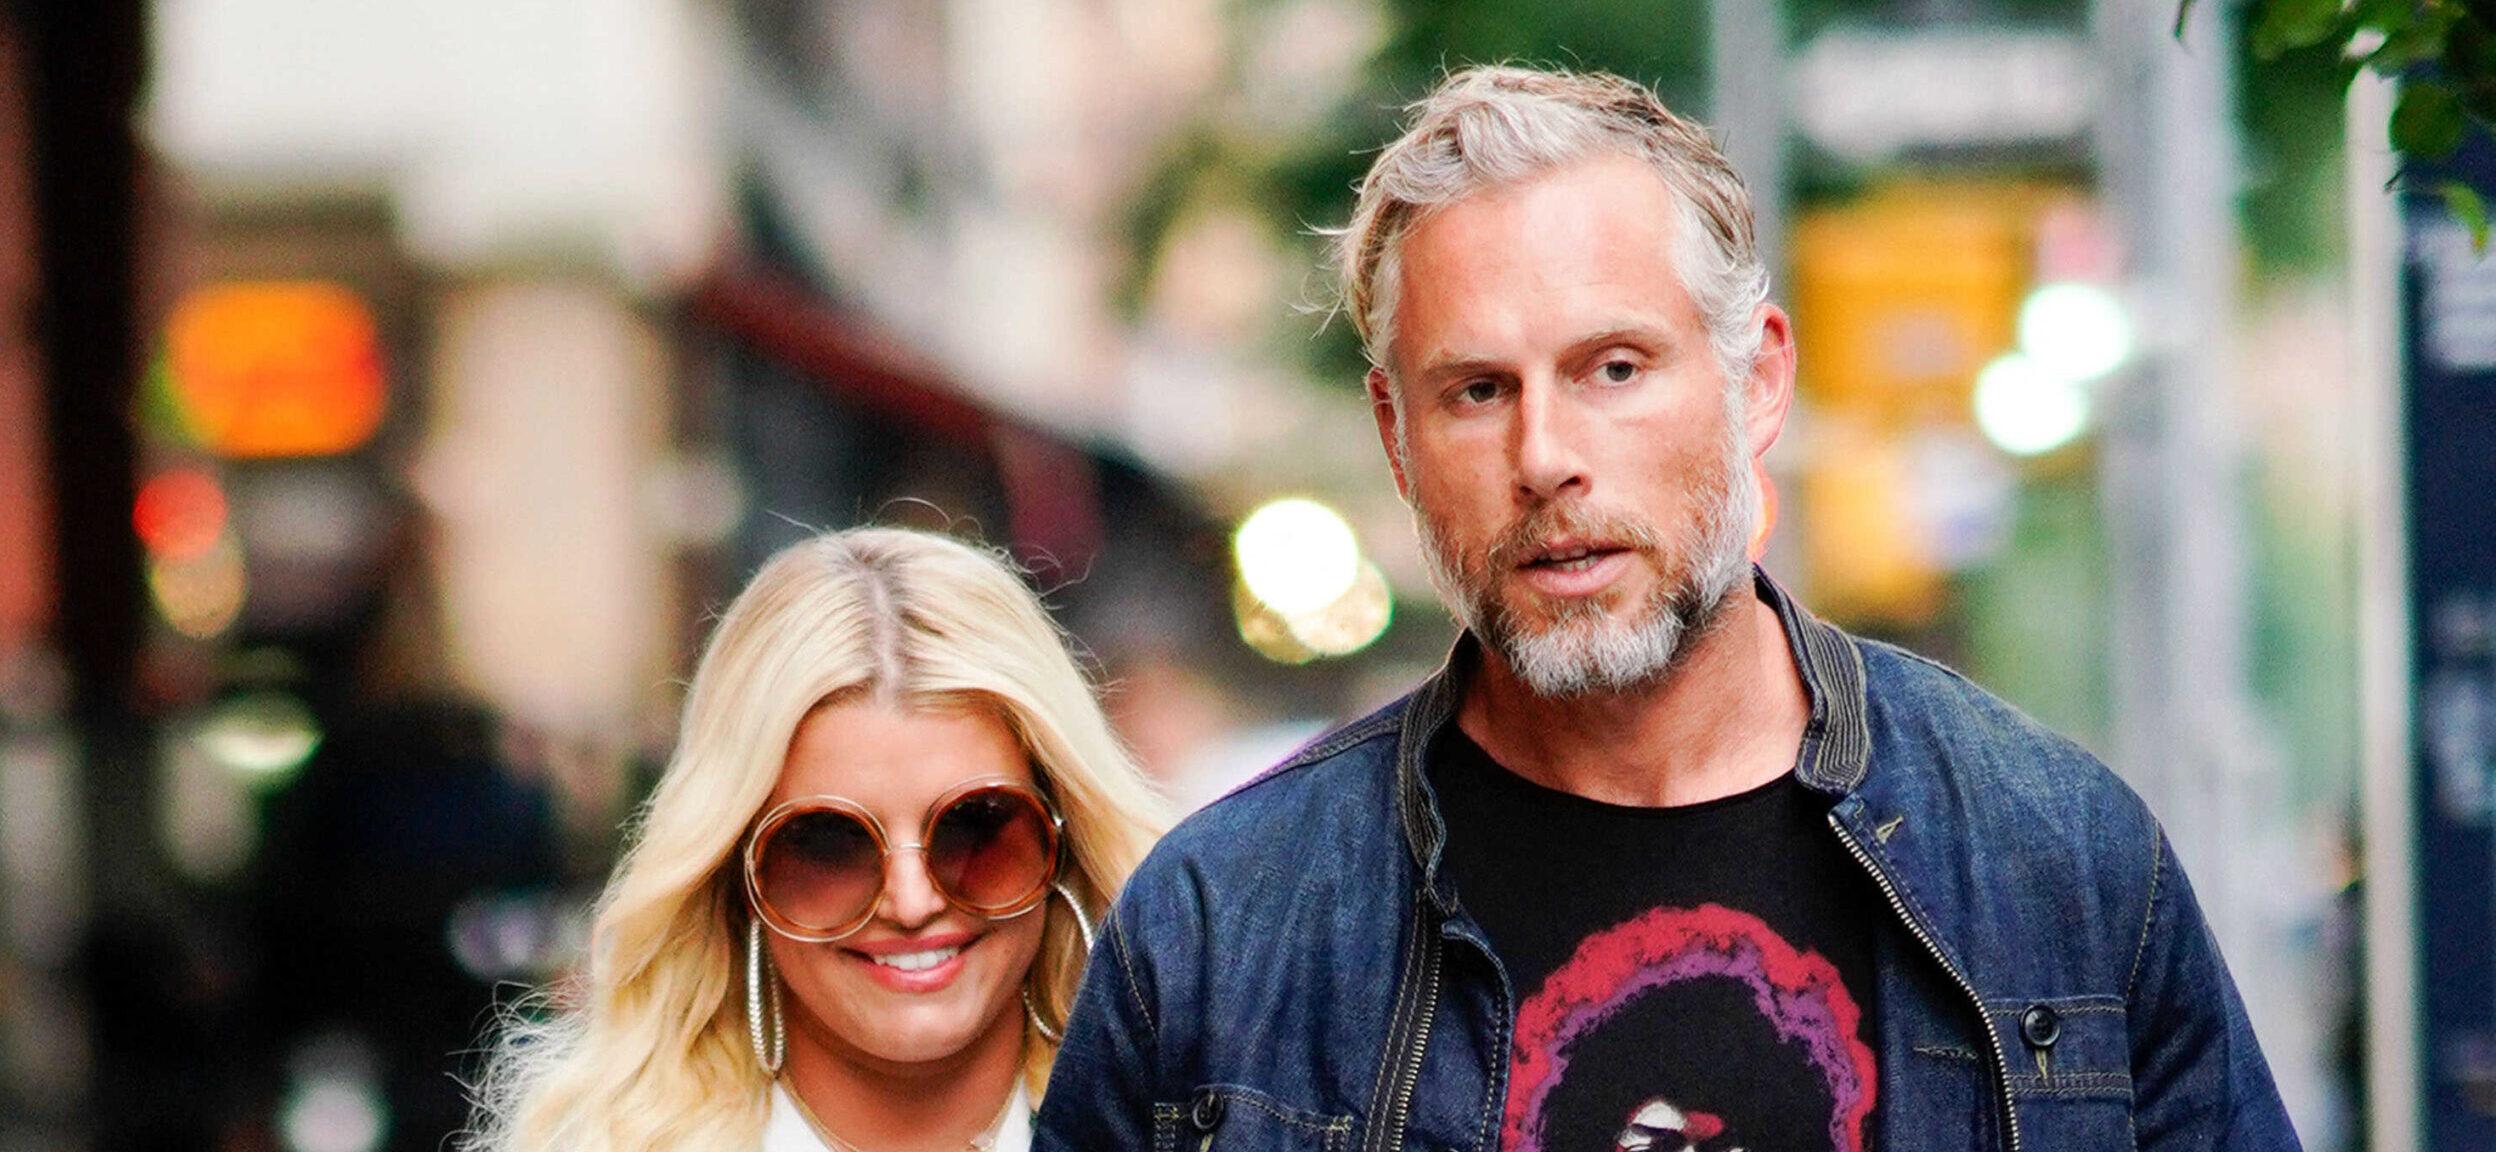 Jessica Simpson Says She Feels ‘Nutured & Supported’ With Husband Eric Johnson